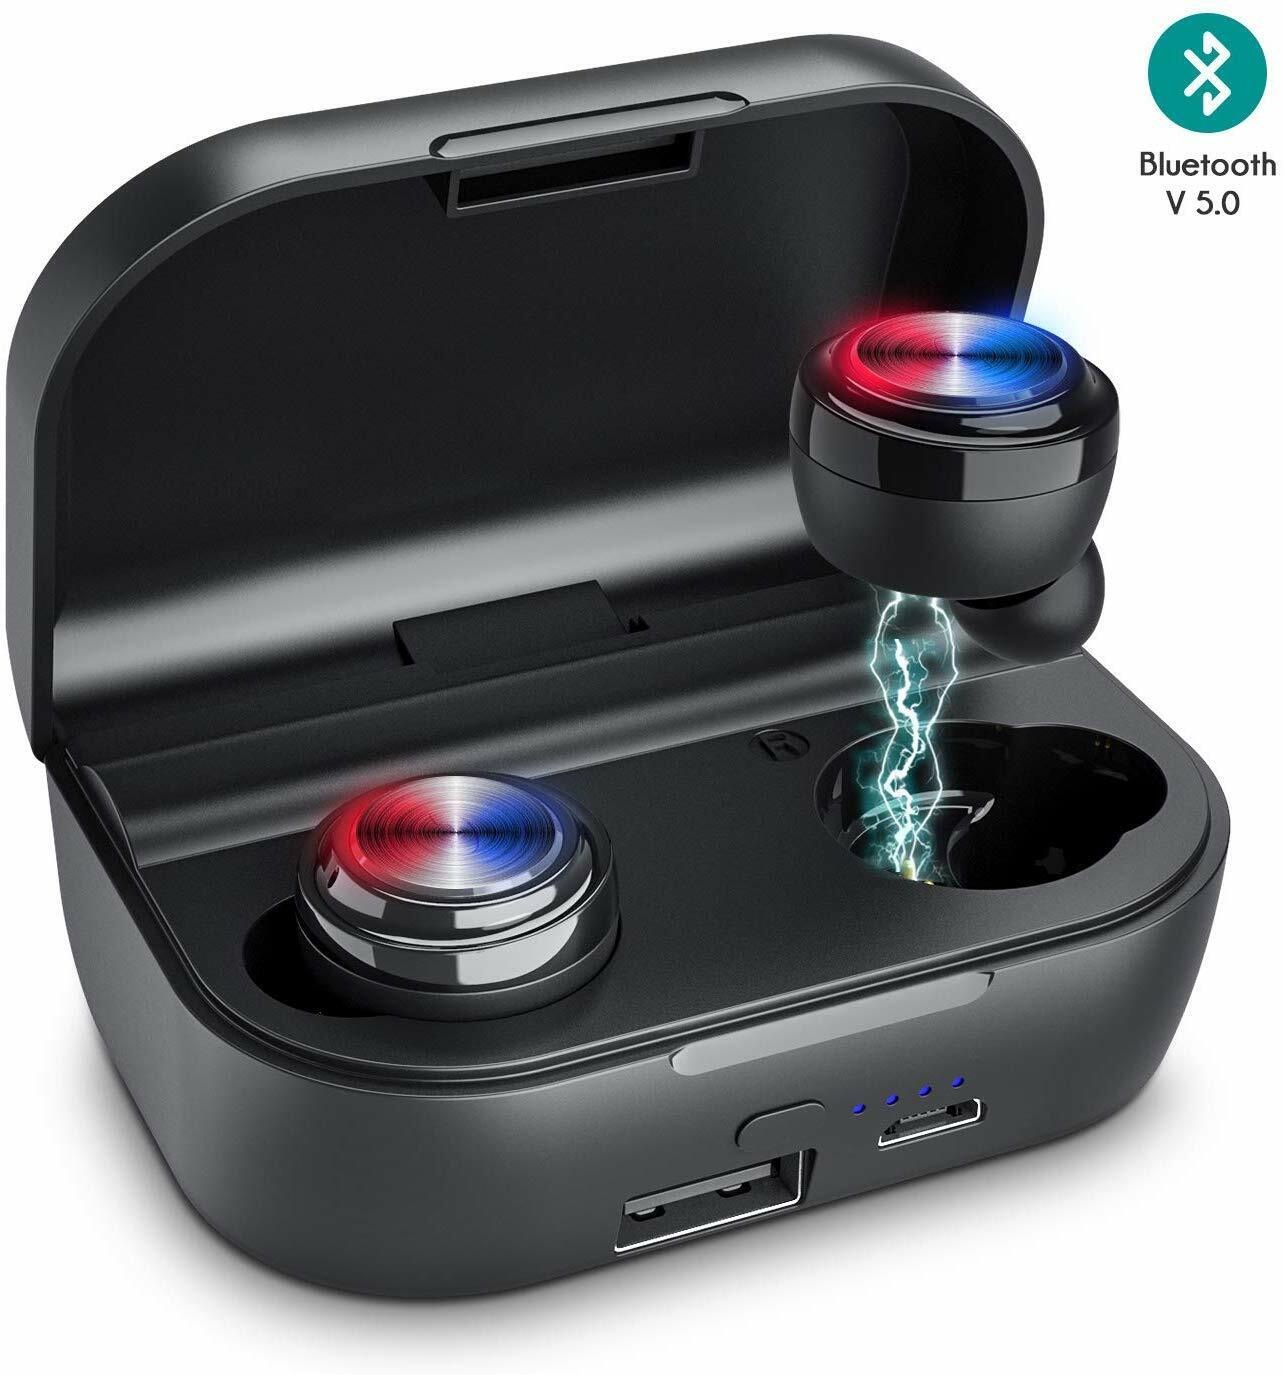 Bluetooth Headphones V 5.0 Wireless Earbuds with Multi-Function Charging Case